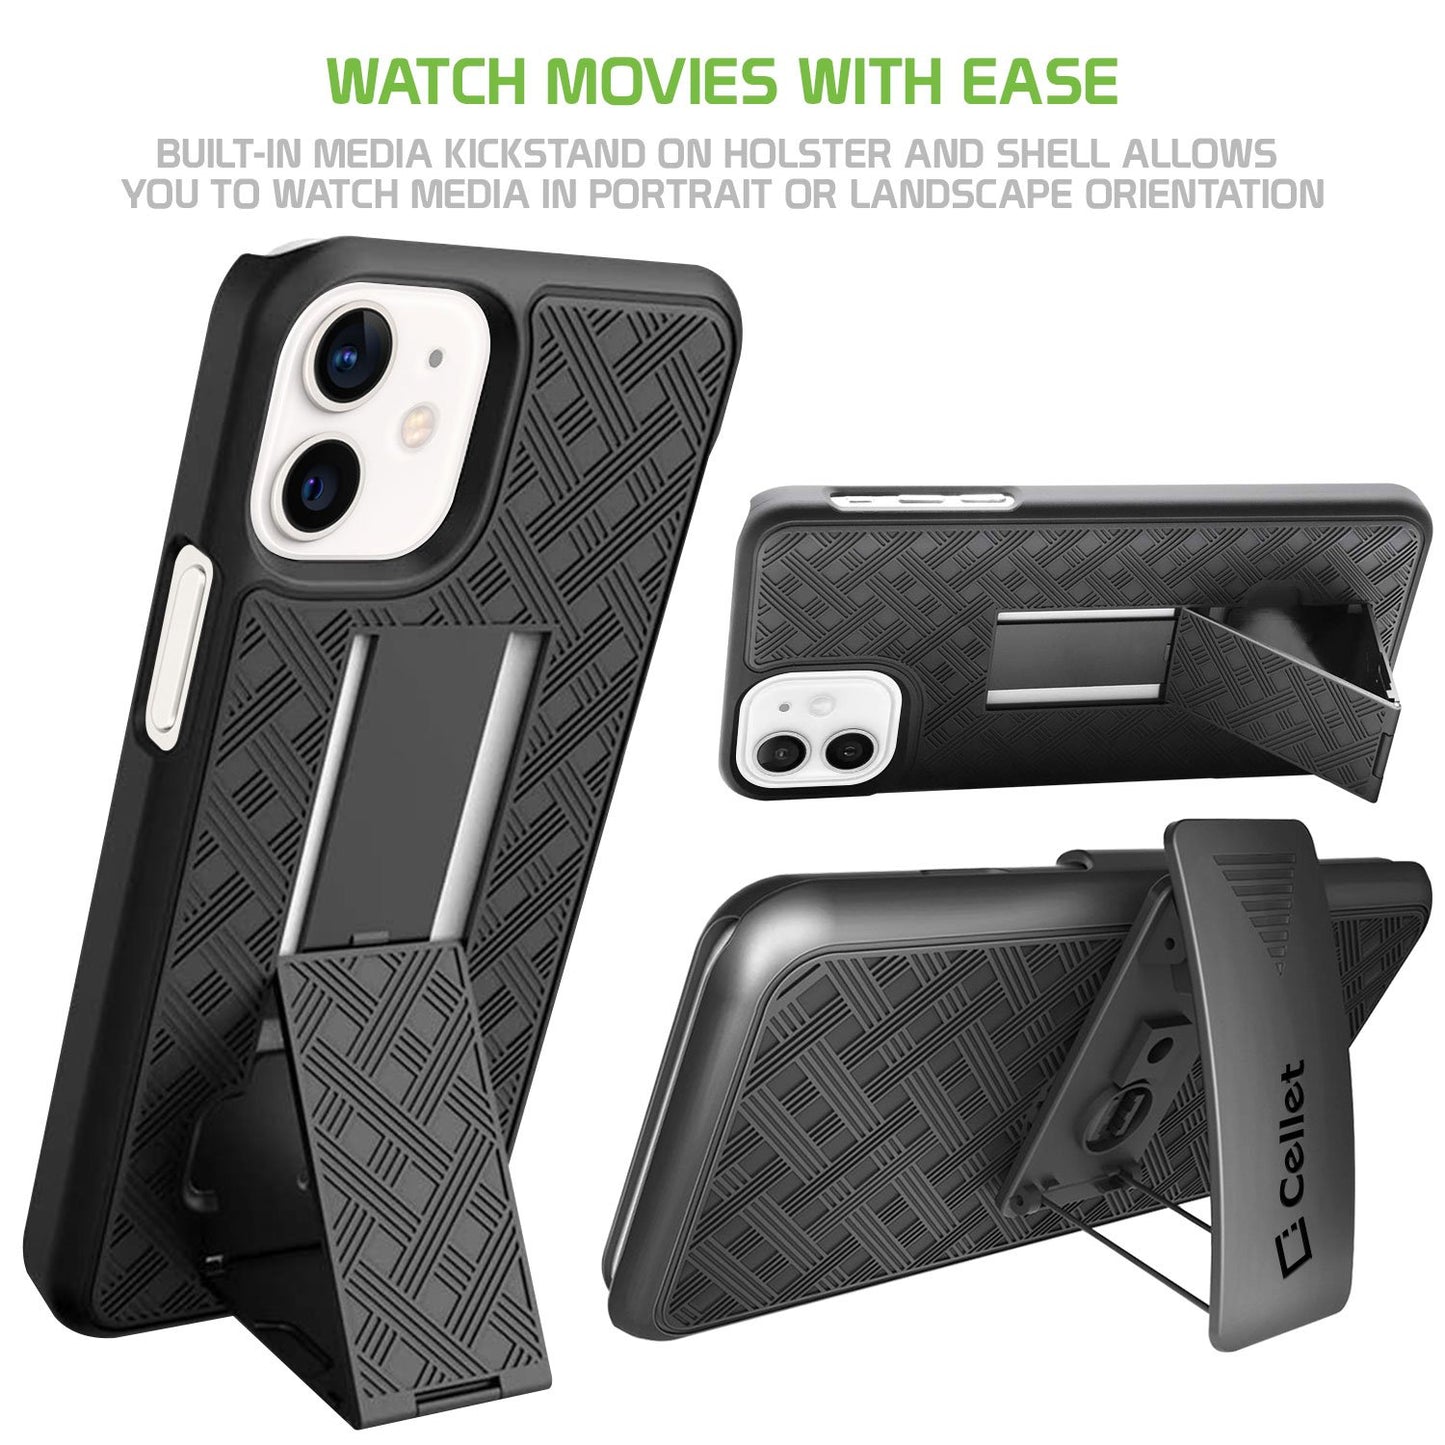 HLIPH12MINI - iPhone 12 Holster mini Holster Case, Shell Holster Kickstand Case with Spring Belt Clip for Apple iPhone 12 Mini – Black – by Cellet